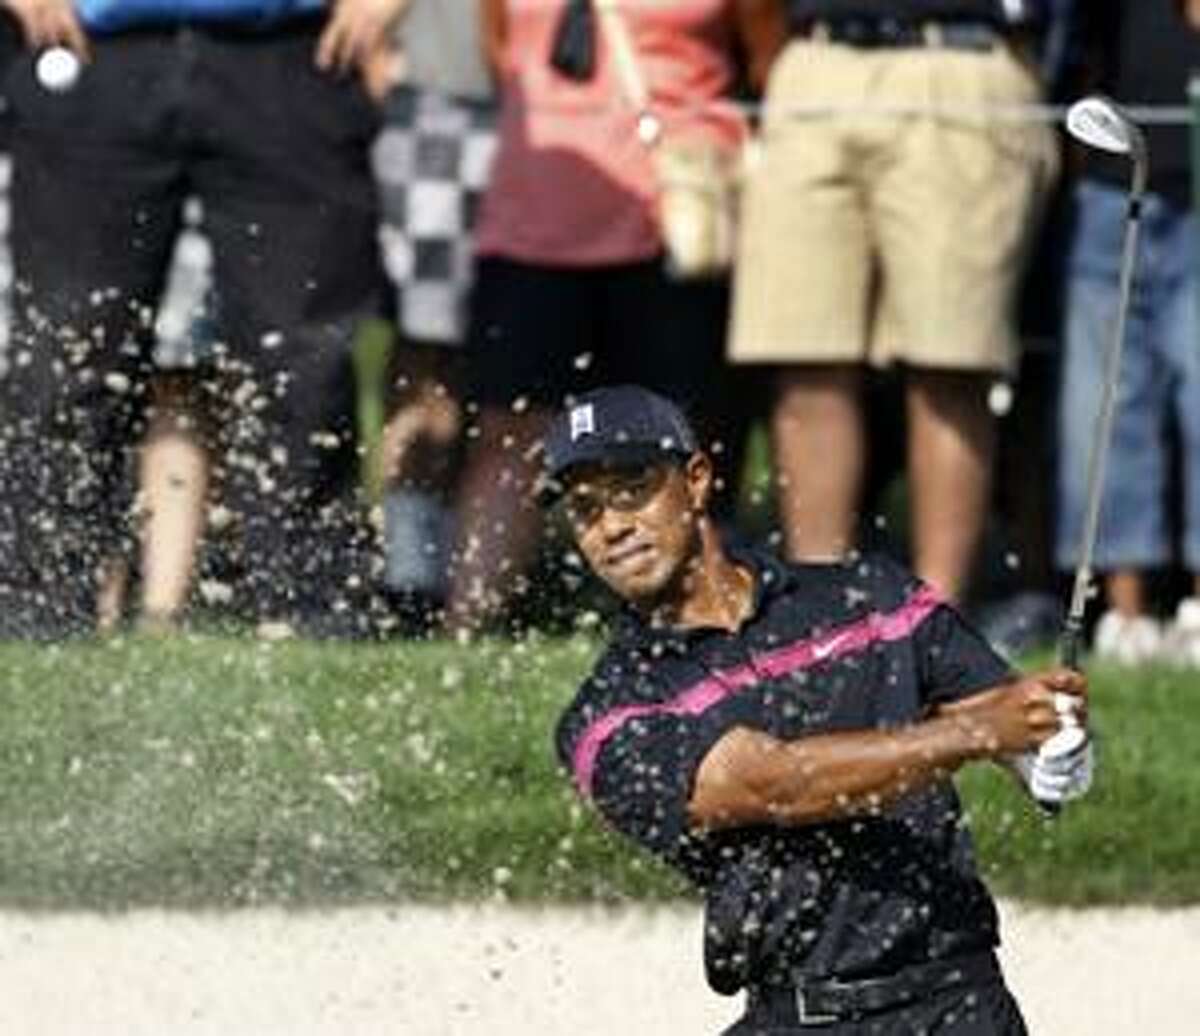 Tiger Woods hits from the 11th bunker during the first round of The Barclays golf tournament, Thursday, Aug. 26, 2010, in Paramus, N.J. (AP Photo/Mel Evans)